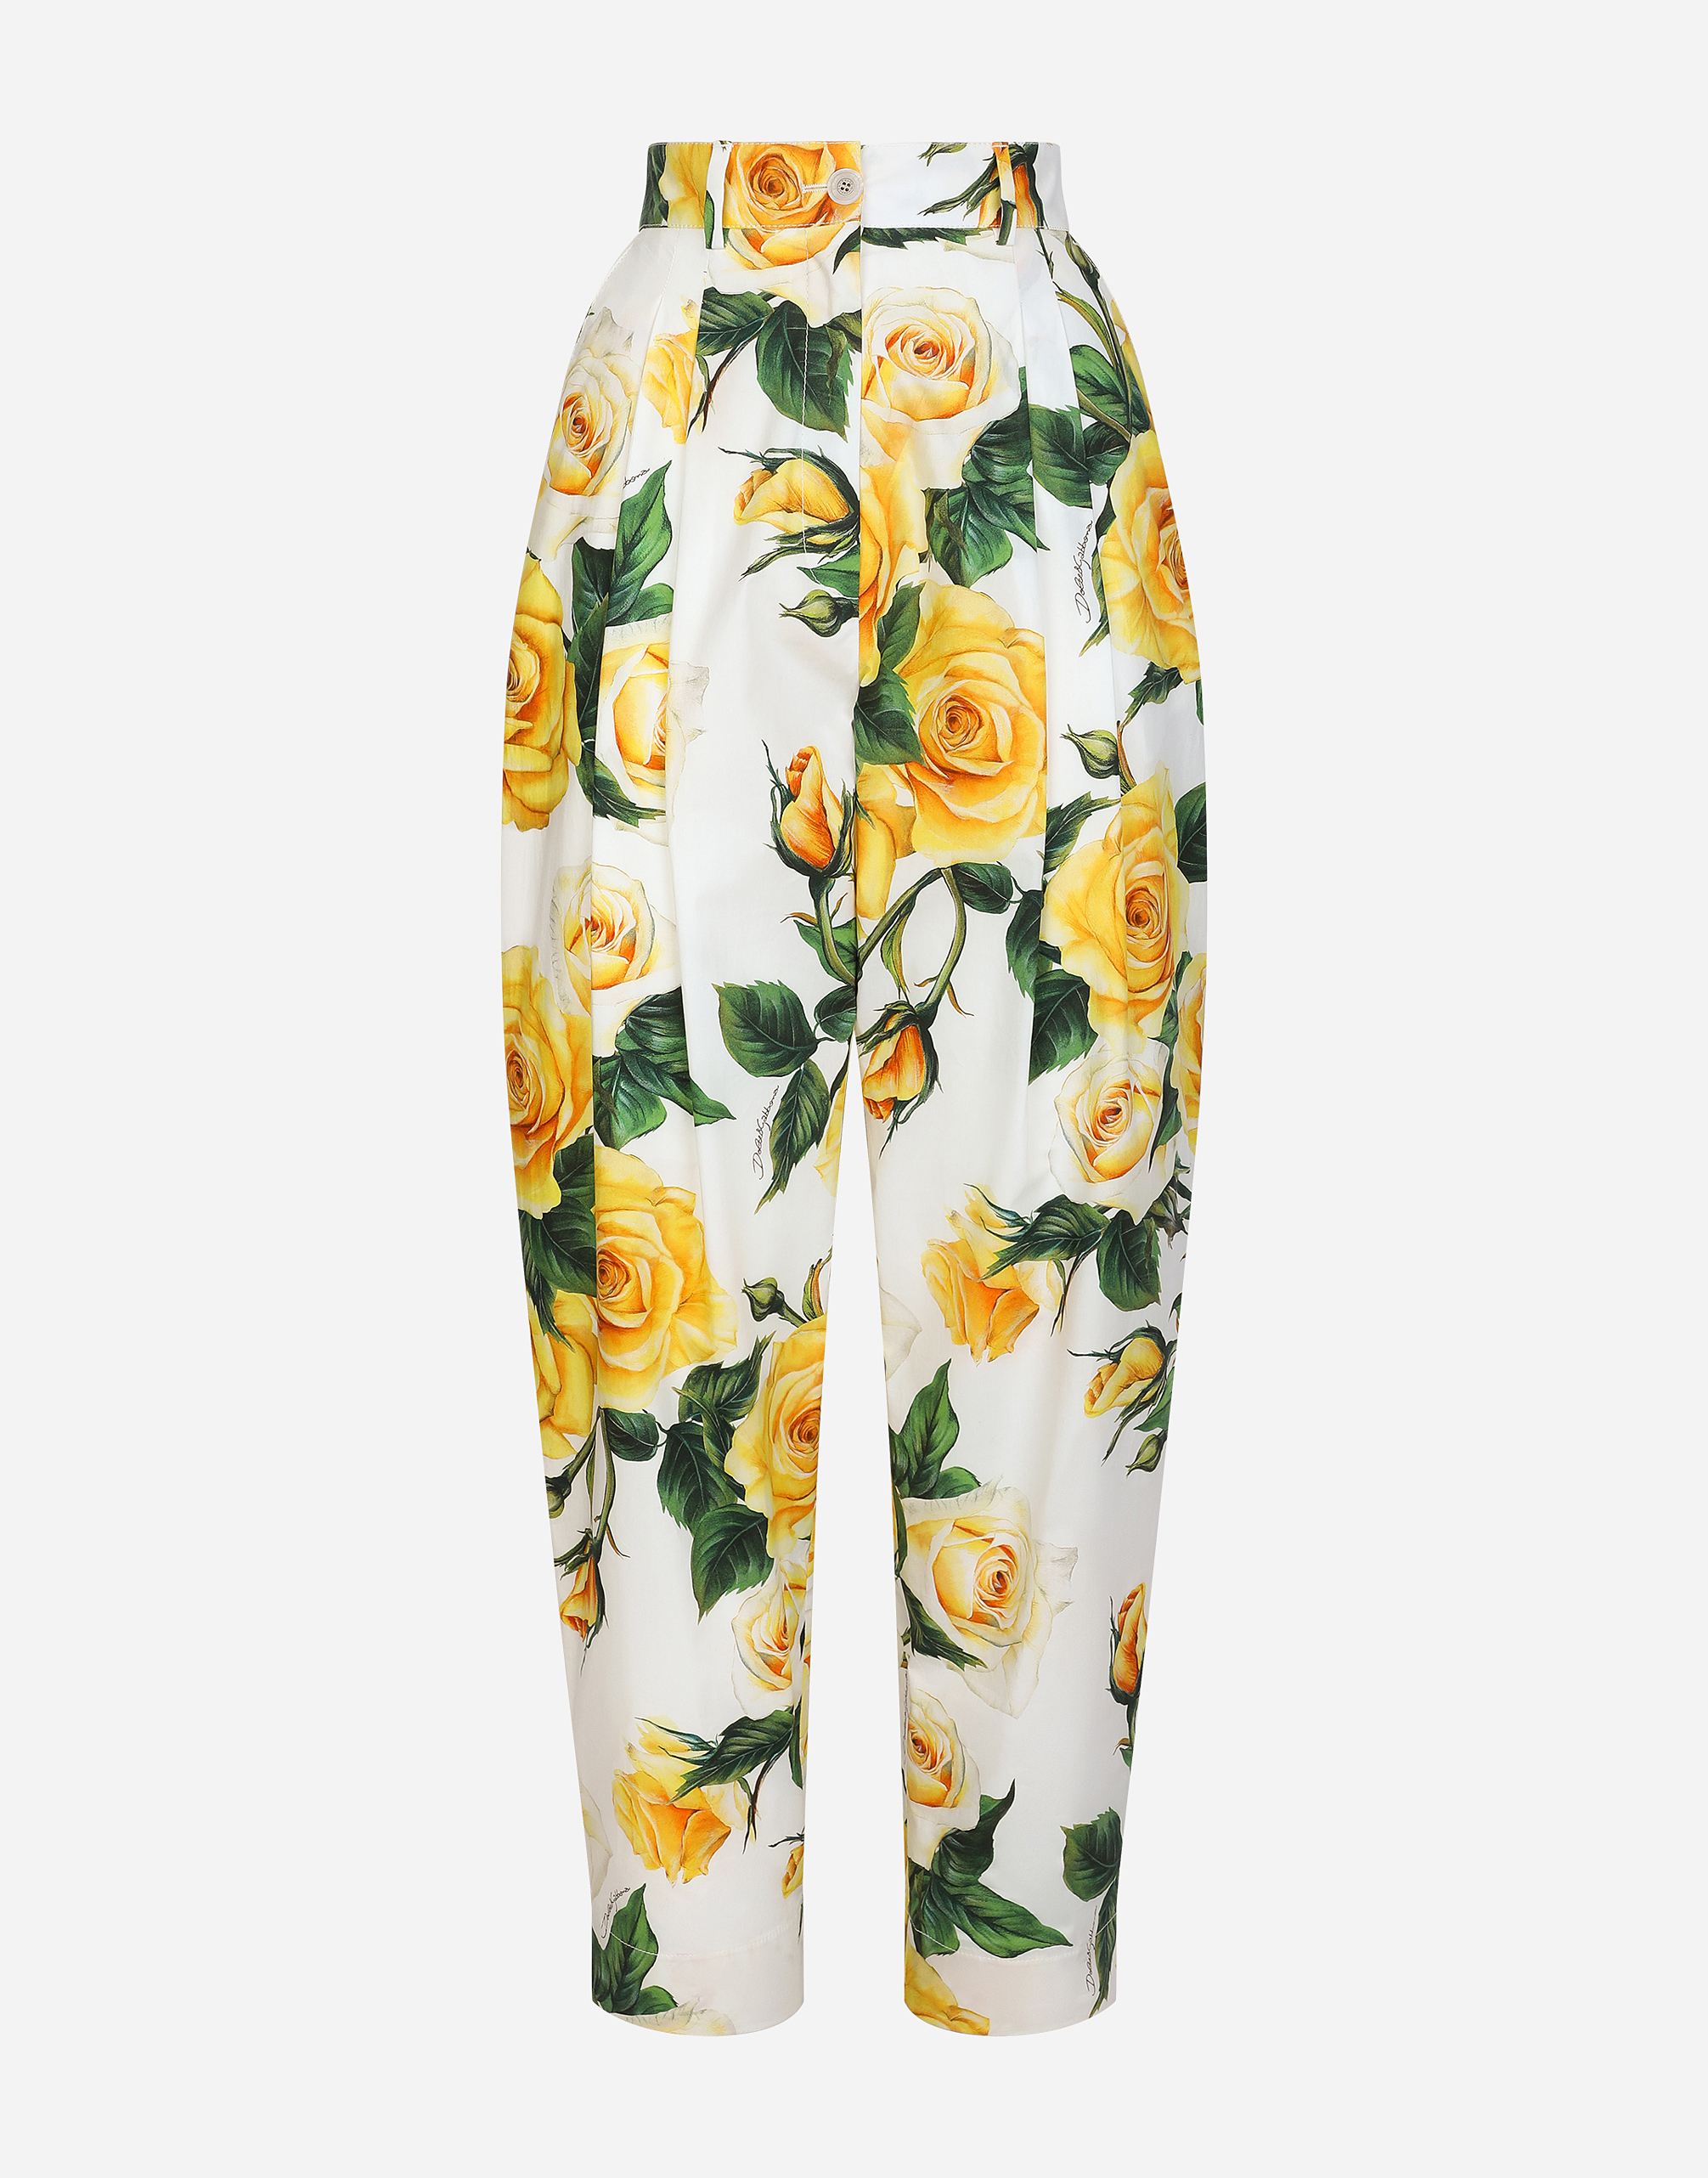 High-waisted cotton pants with yellow rose print in Print for 